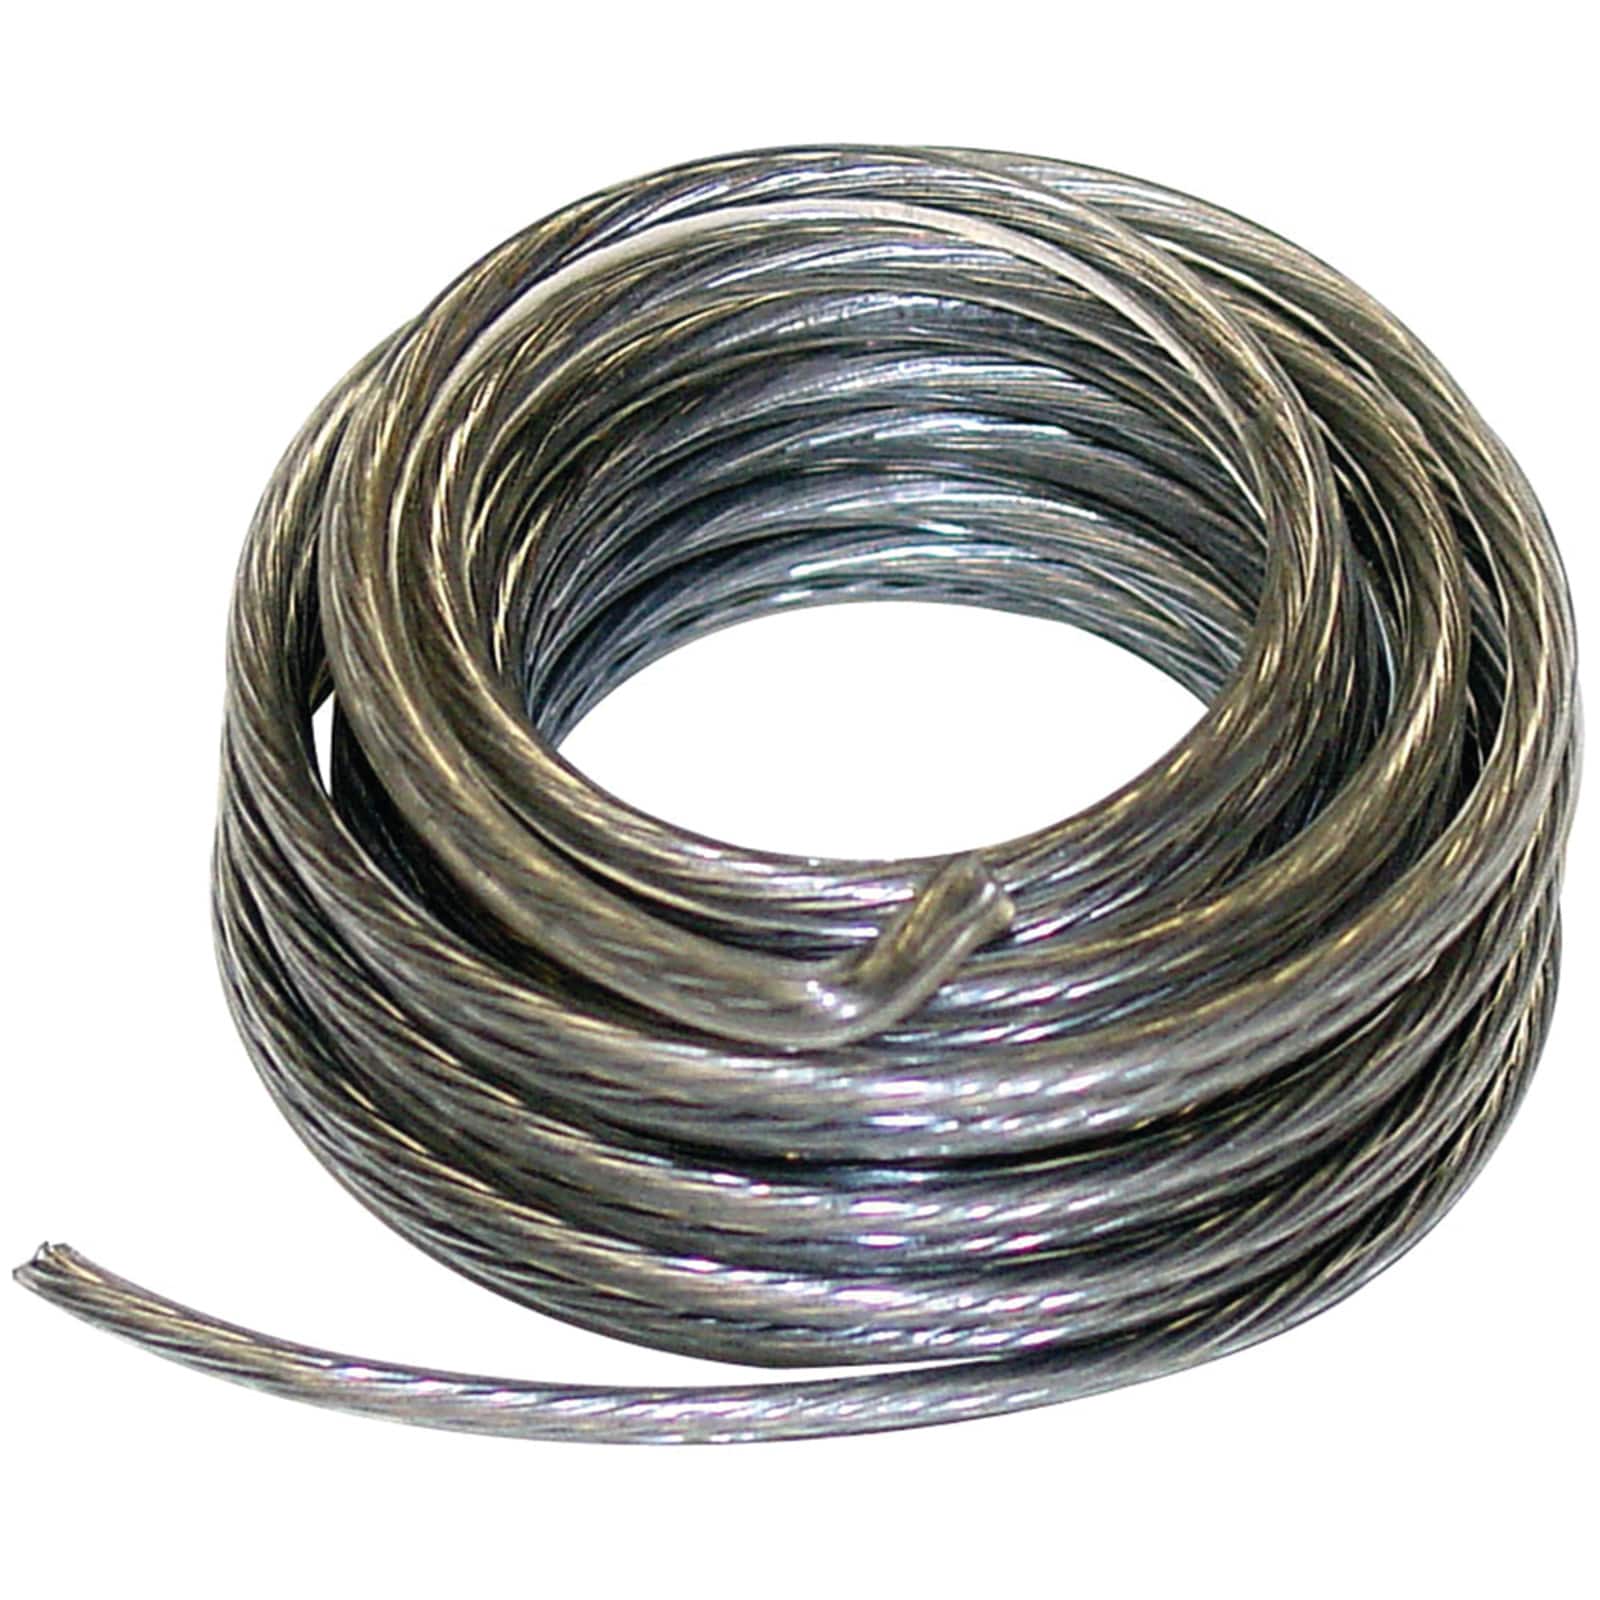 OOK® 50 lb. 9' Stainless Steel Picture Hanging Wire at Menards®